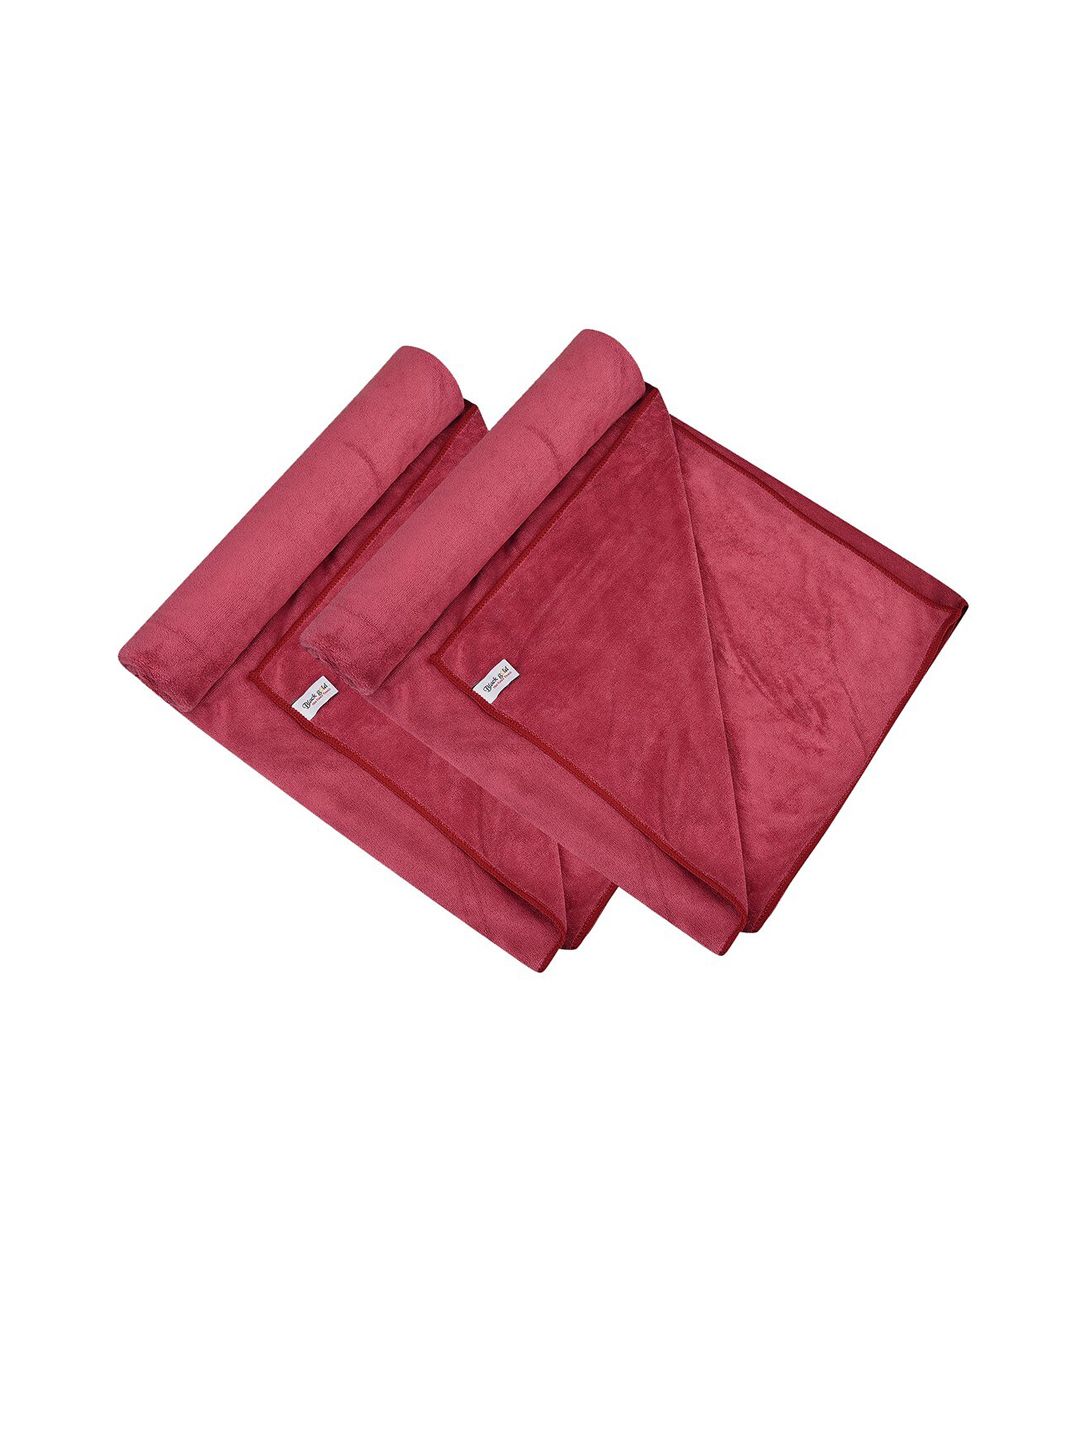 Black gold Pack of 2 Dark Pink Solid Bath Towels Price in India